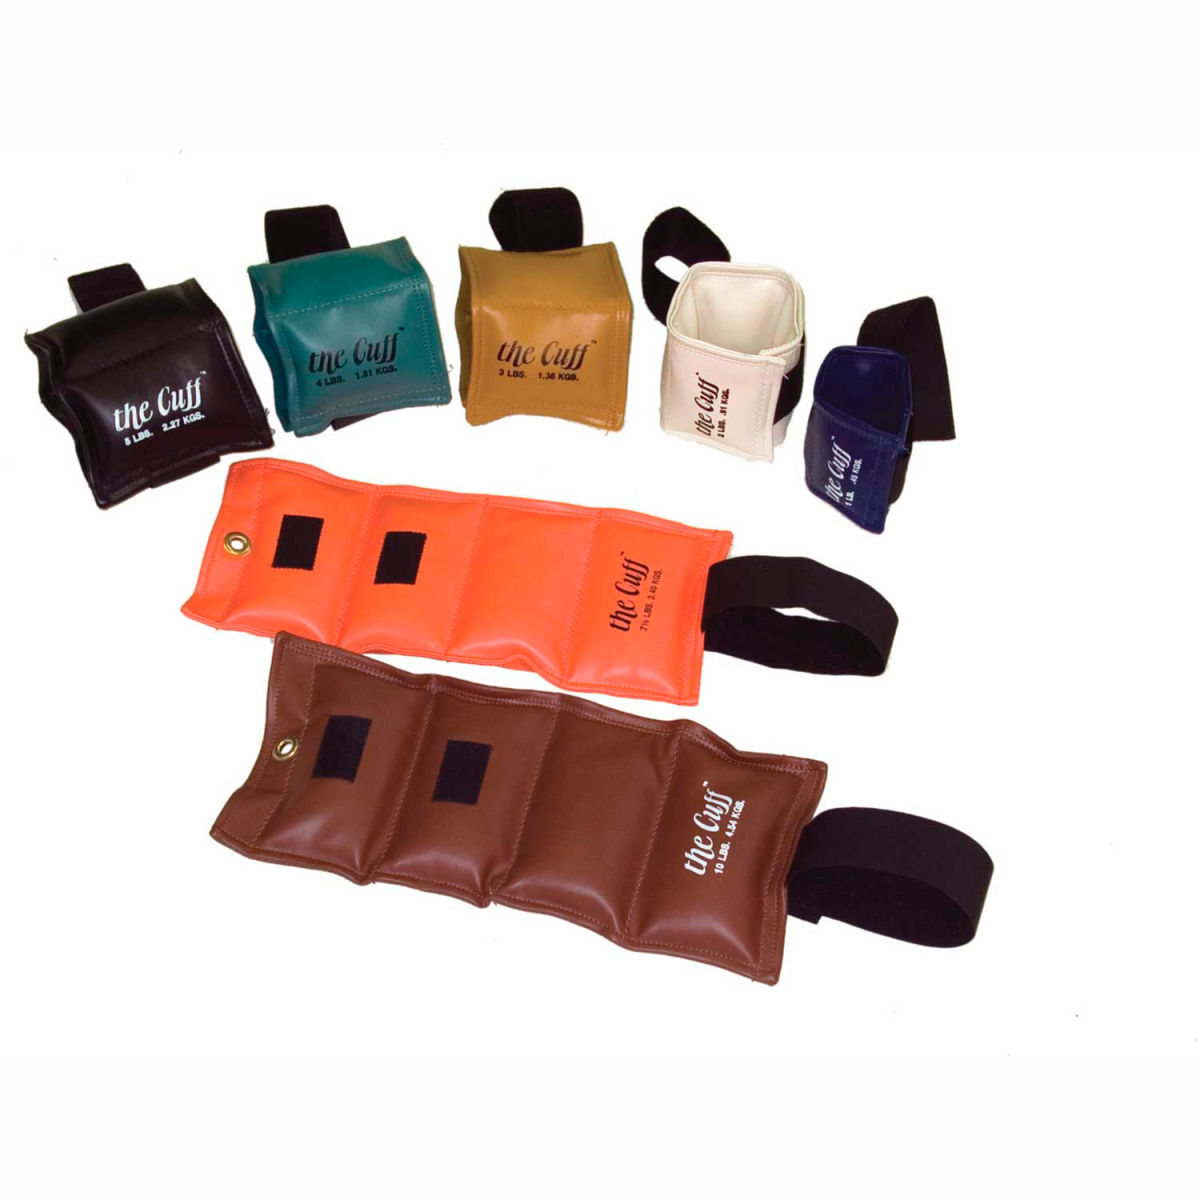 Picture of Fabrication Enterprises B2192706 Cuff Deluxe Wrist & Ankle Weight - 7 Piece